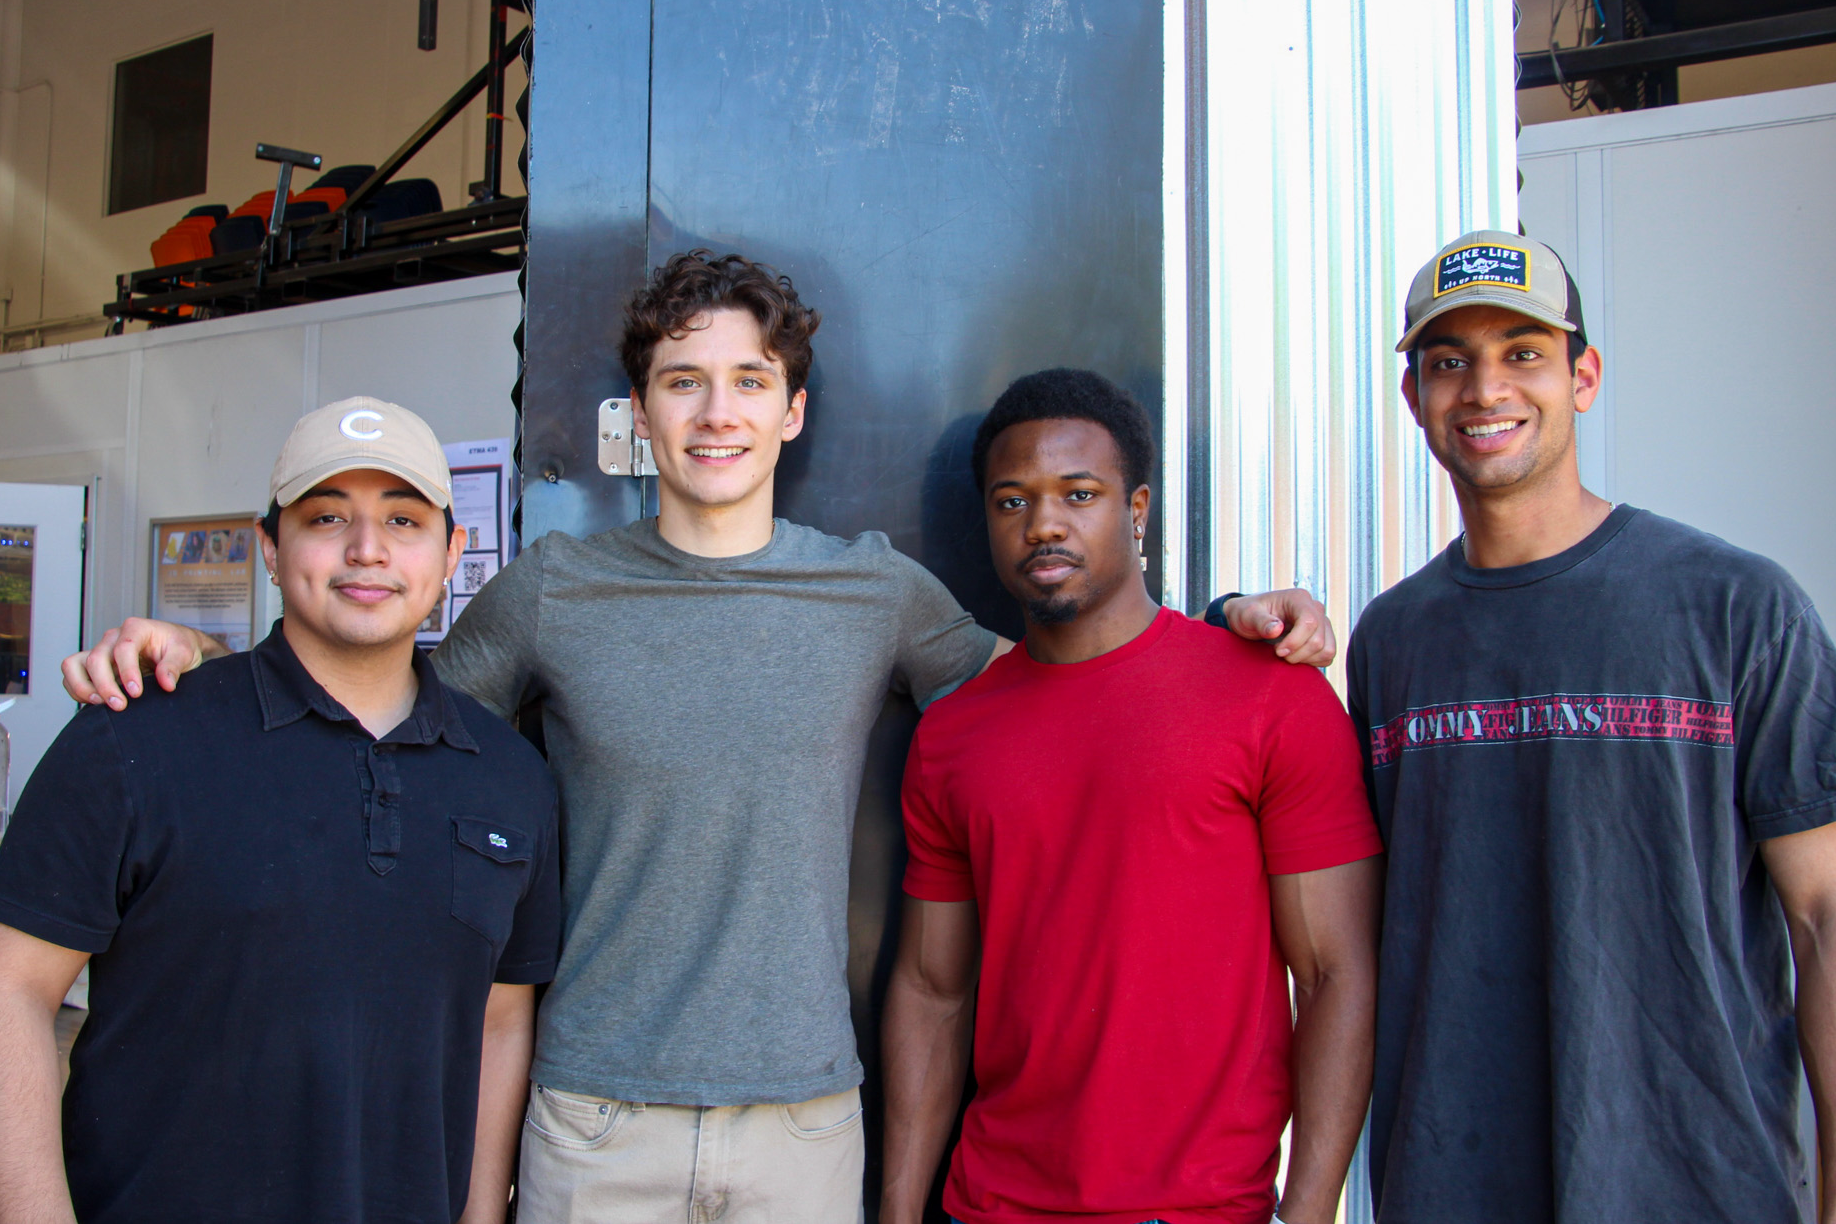 Four young men standing together and smiling in a workshop environment.